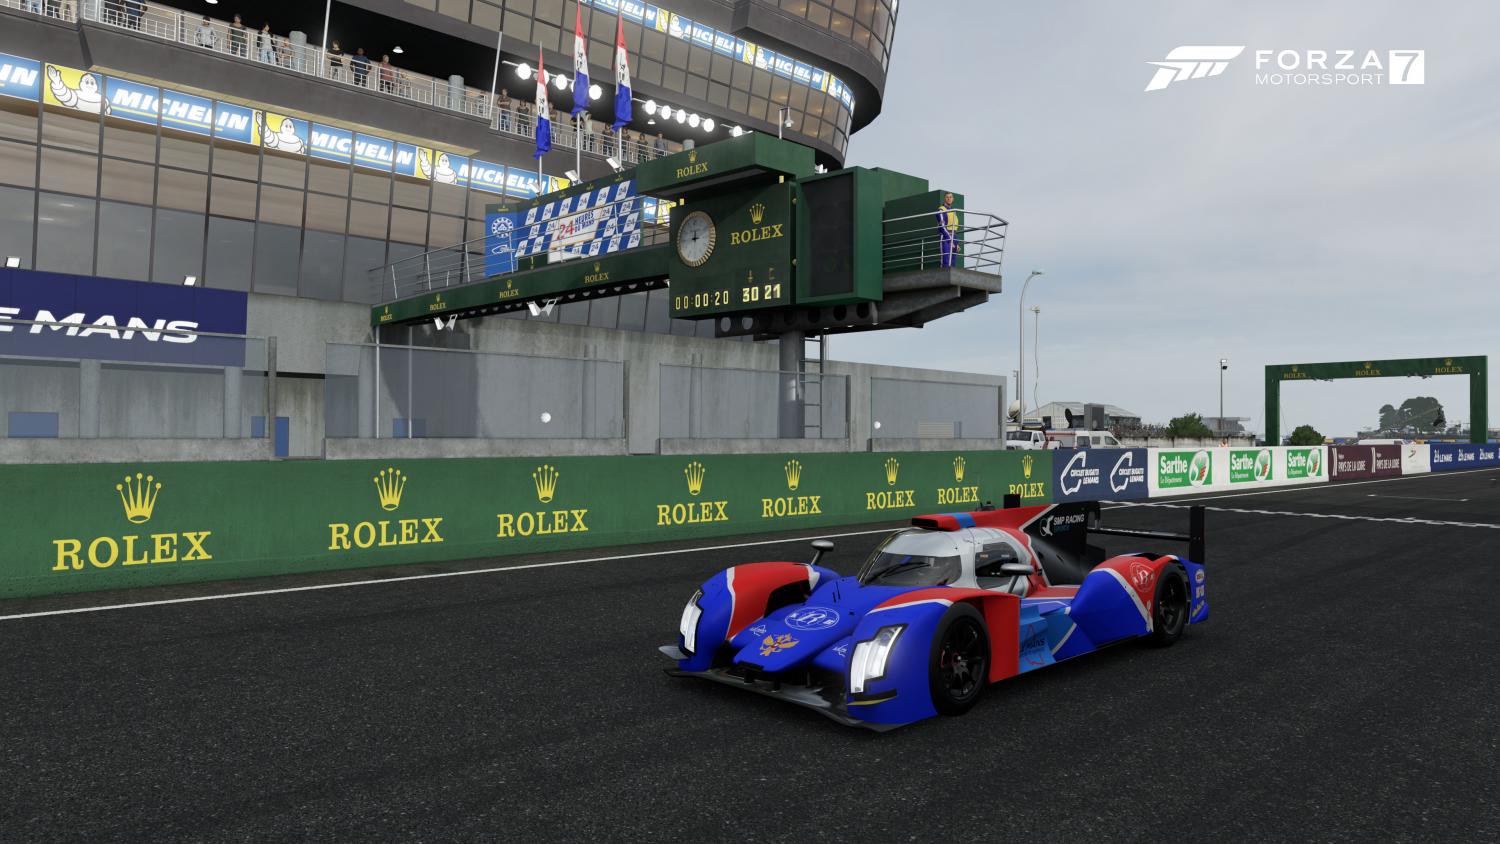 Smp Racing Ле ман. Smp Ле ман 2022. Автомобиль smp Racing. Le mans 24 hours smp. Lec 2024 spring